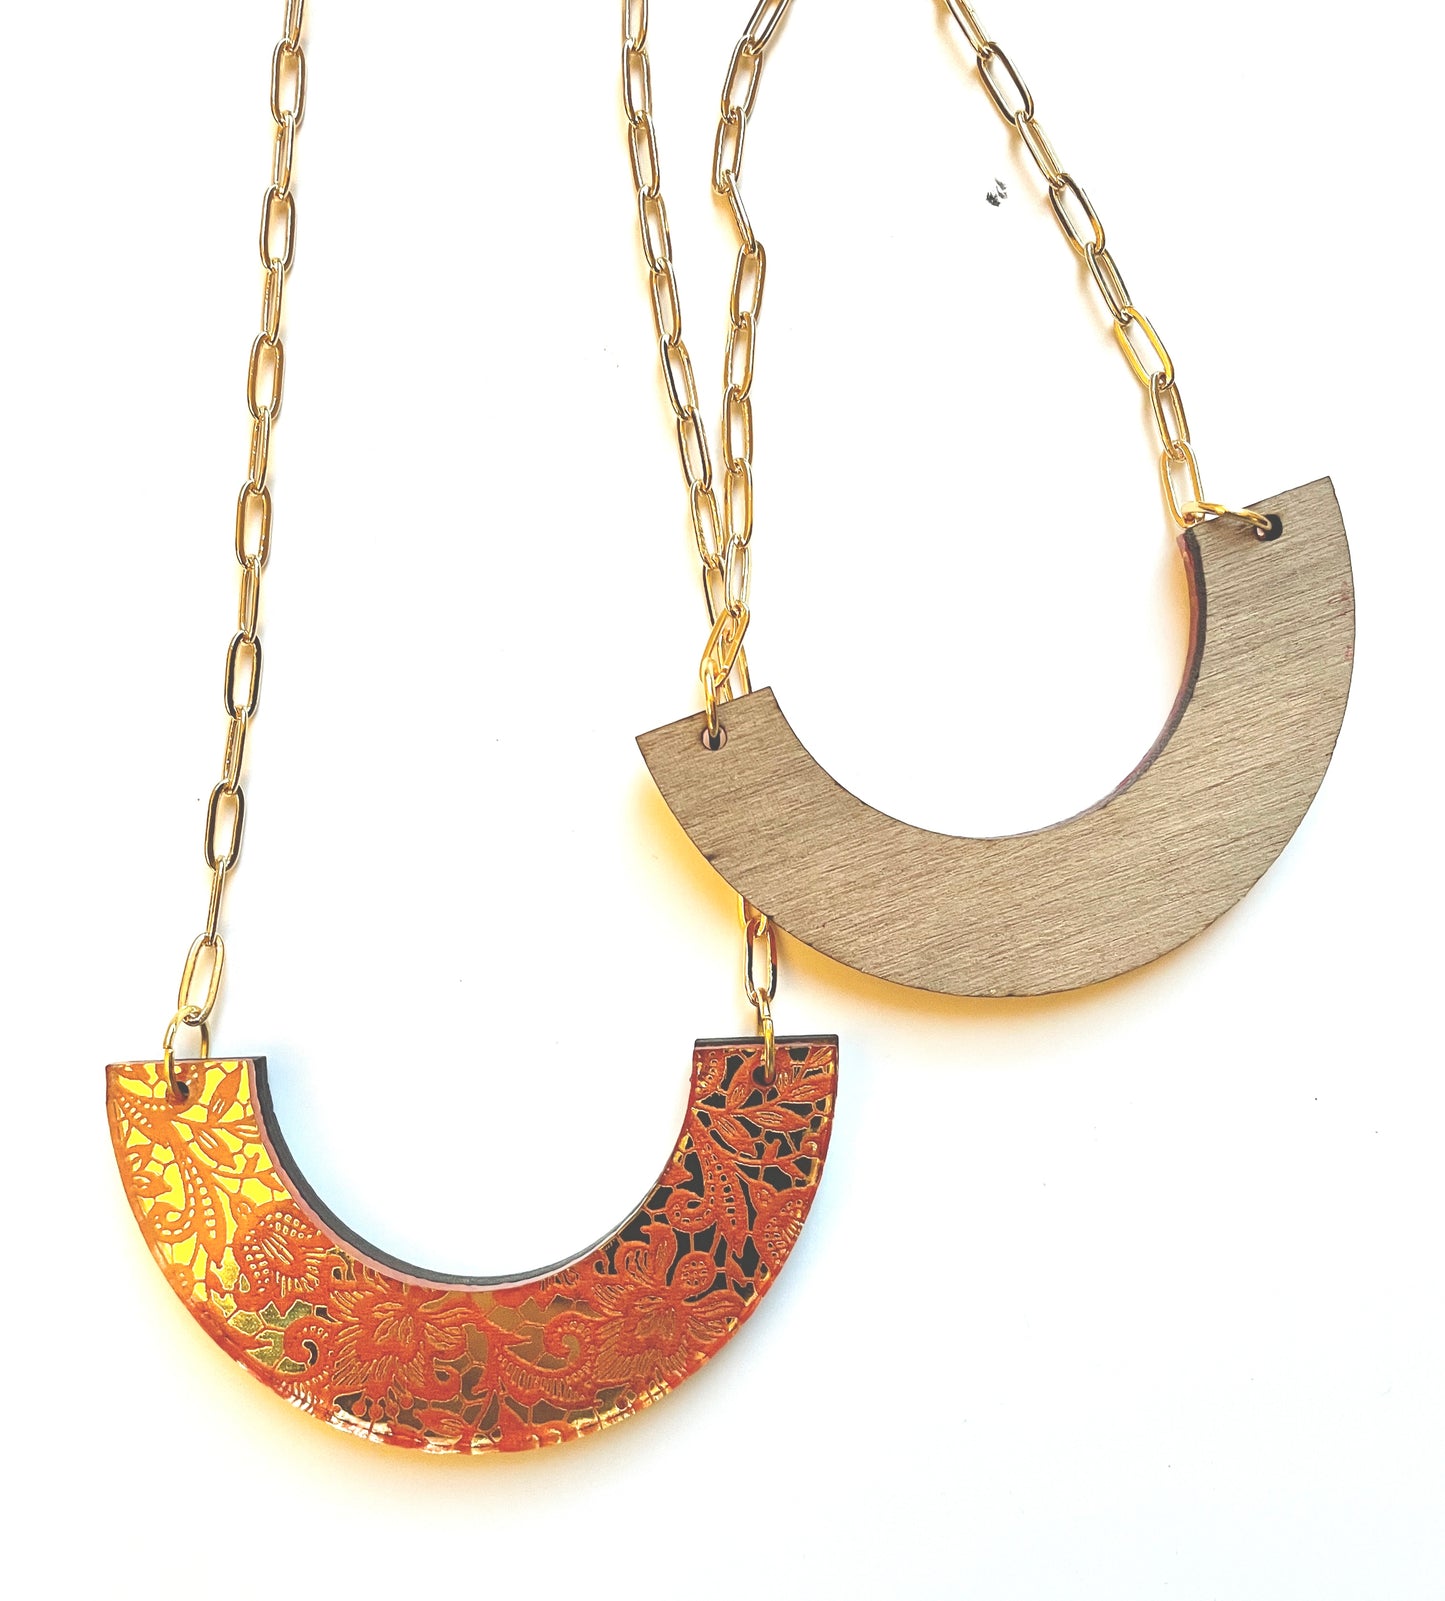 Acrylic and Wood Necklace, Laser etched Lace Pattern Length 20 inches.